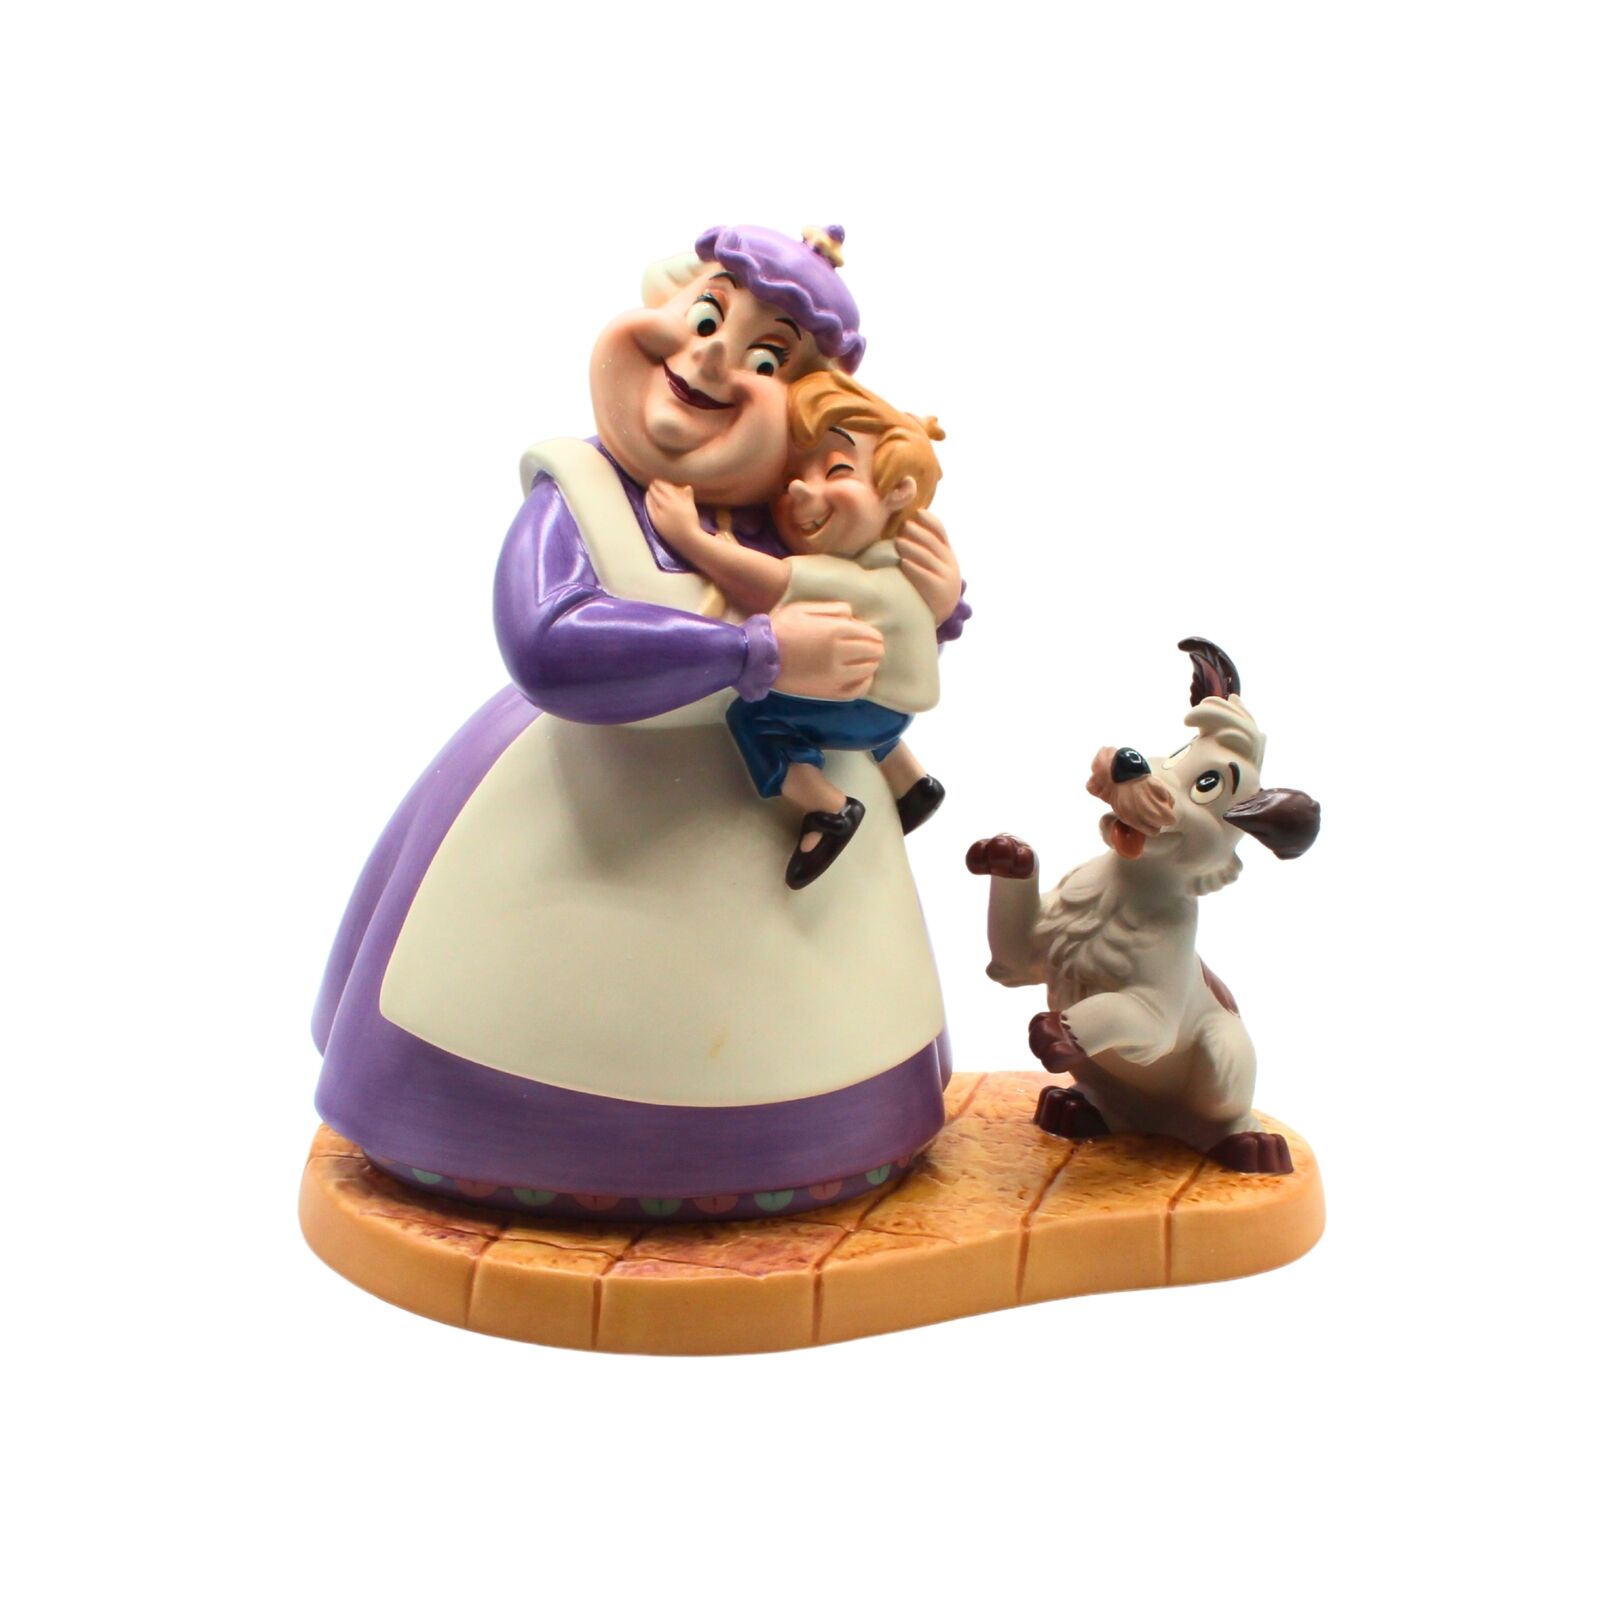 WDCC Mrs. Potts, Chip - The Curse is Broken | Limited to 1000 | New in Box